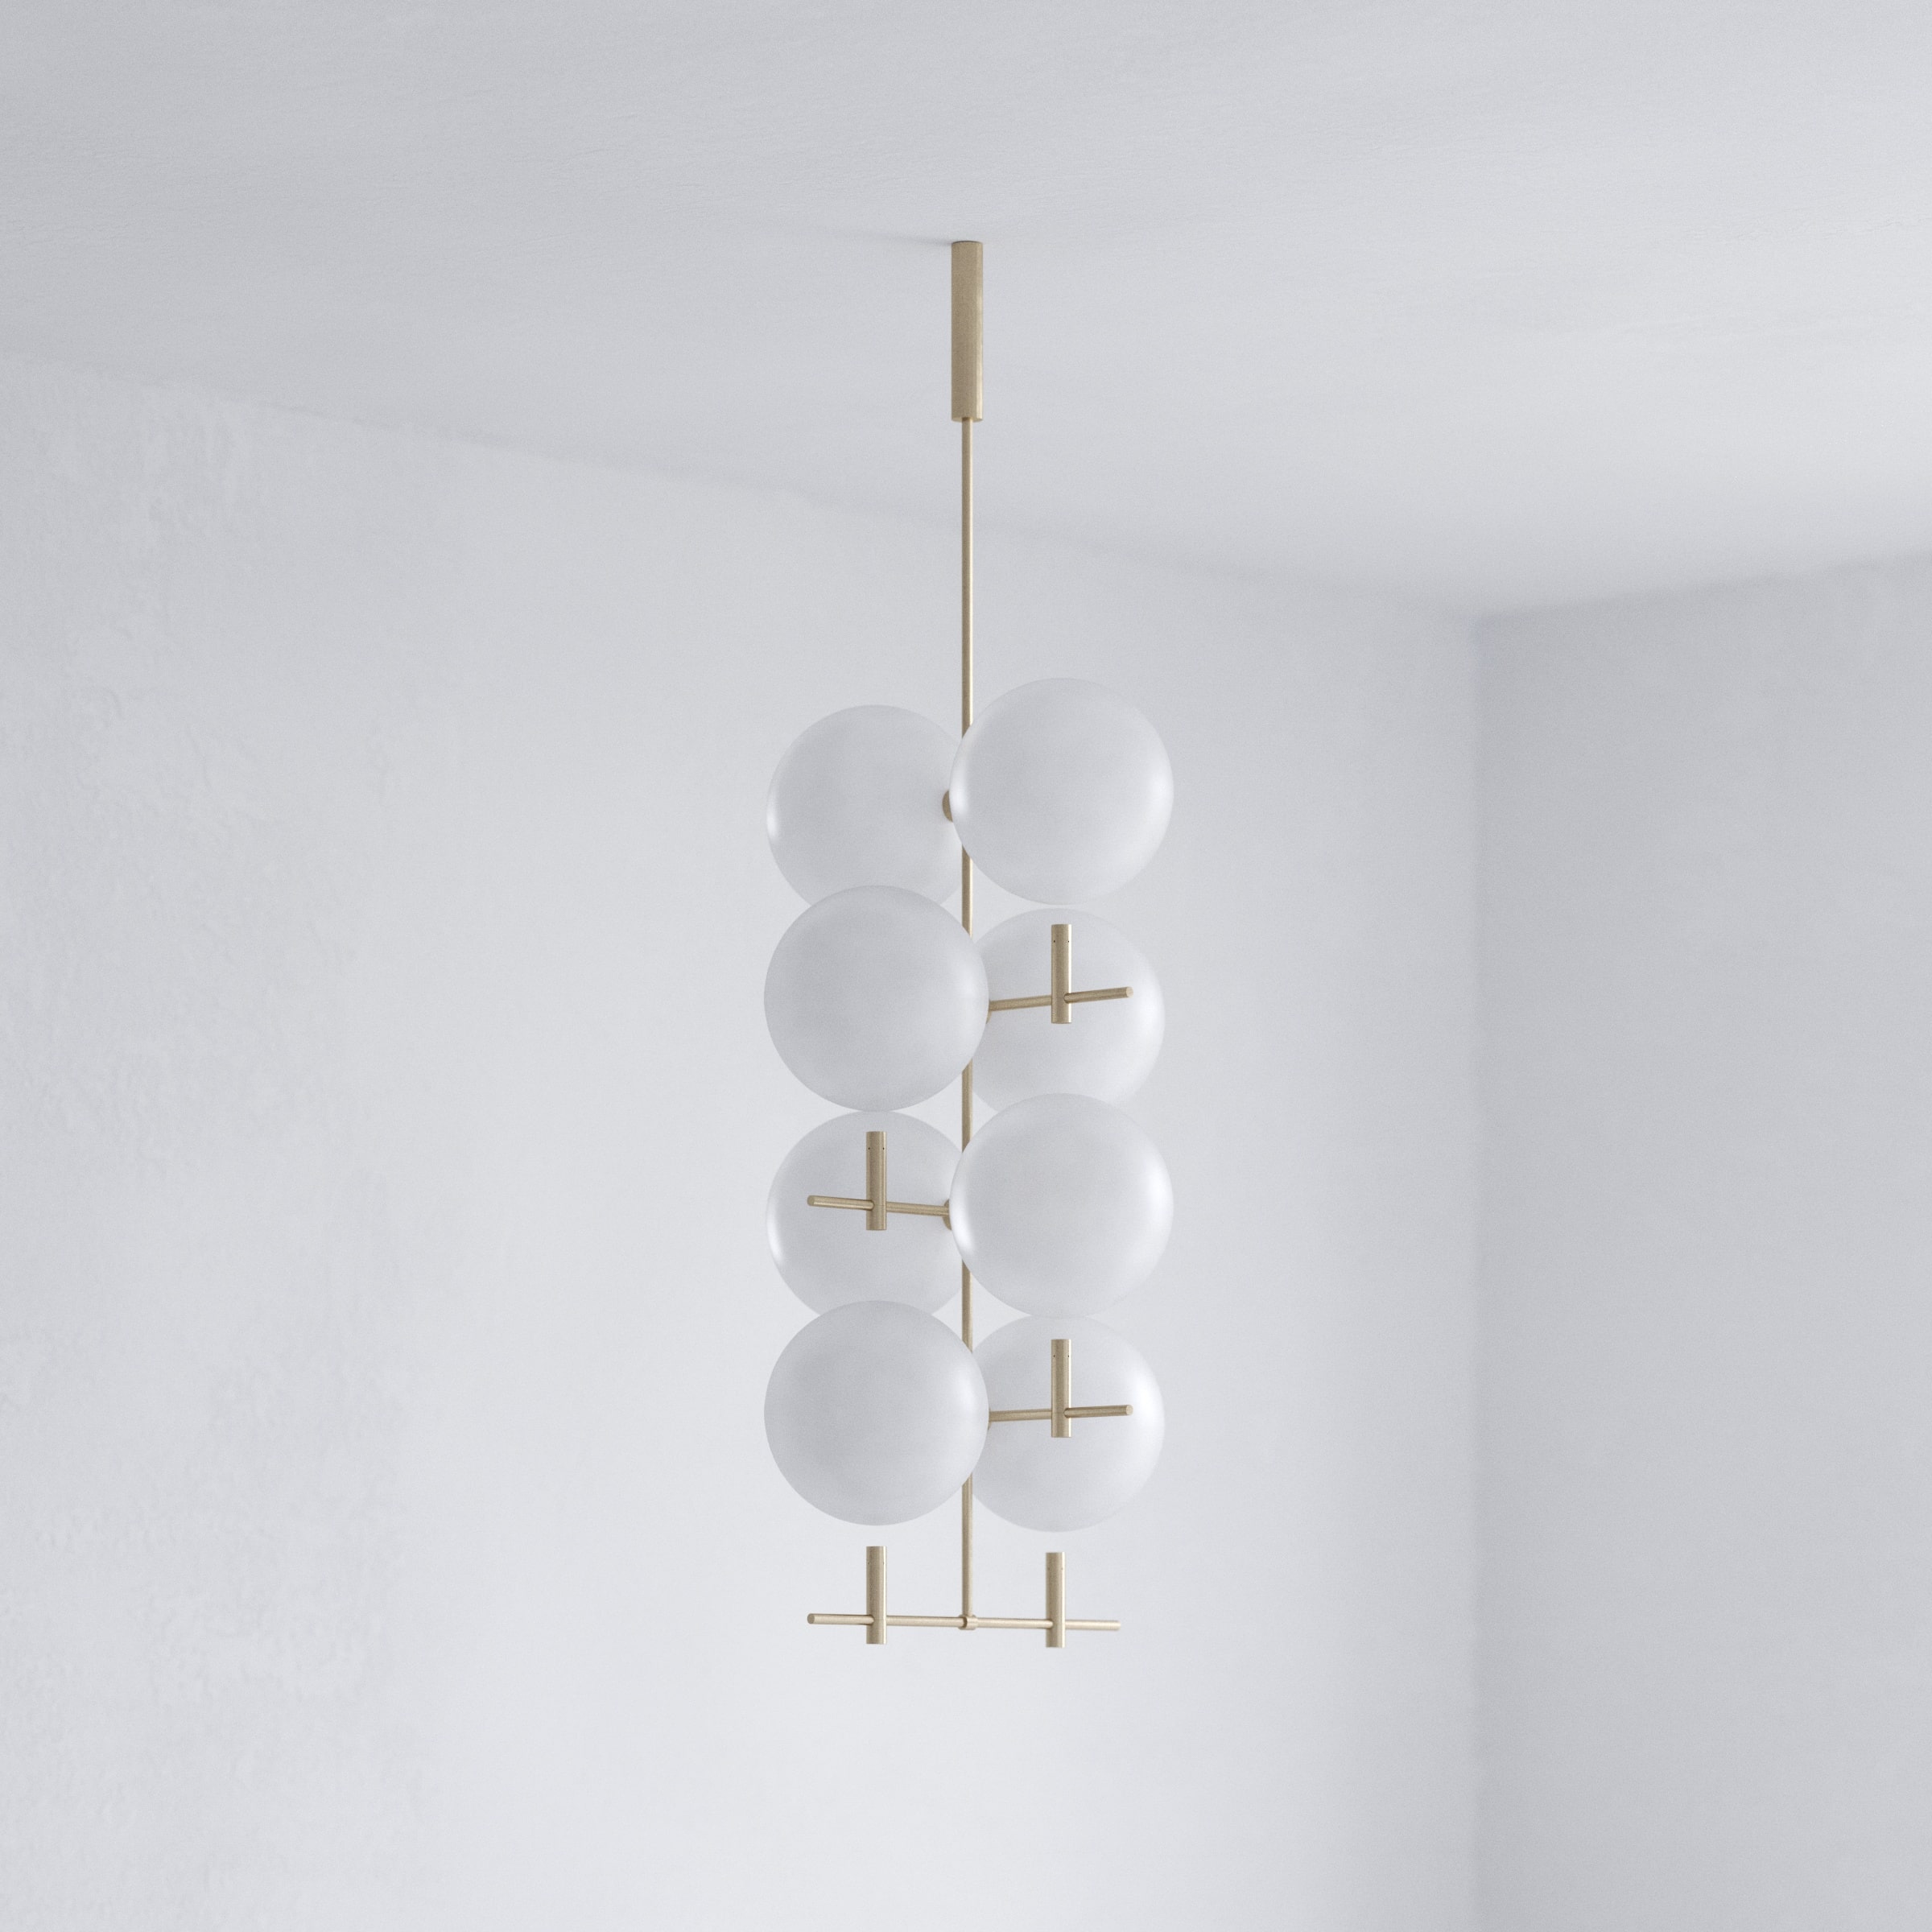 Handmade Luna Luminaries Collection of Lightning made of Glass and Brass Eight Lamps in Golden Edition